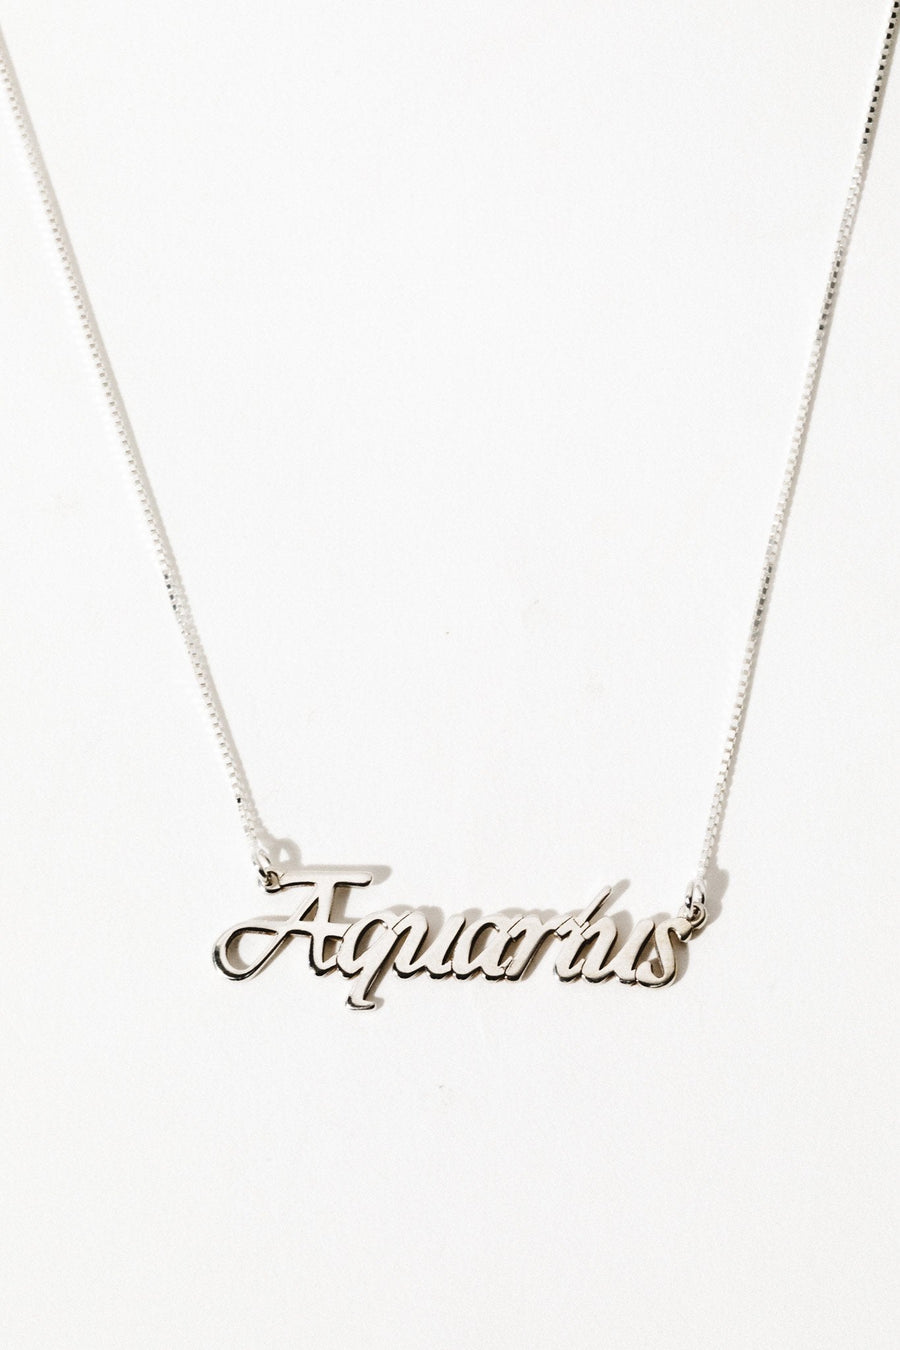 The Goth Booth Jewelry Aquarius / Silver / 16 inches Signature Zodiac Necklace